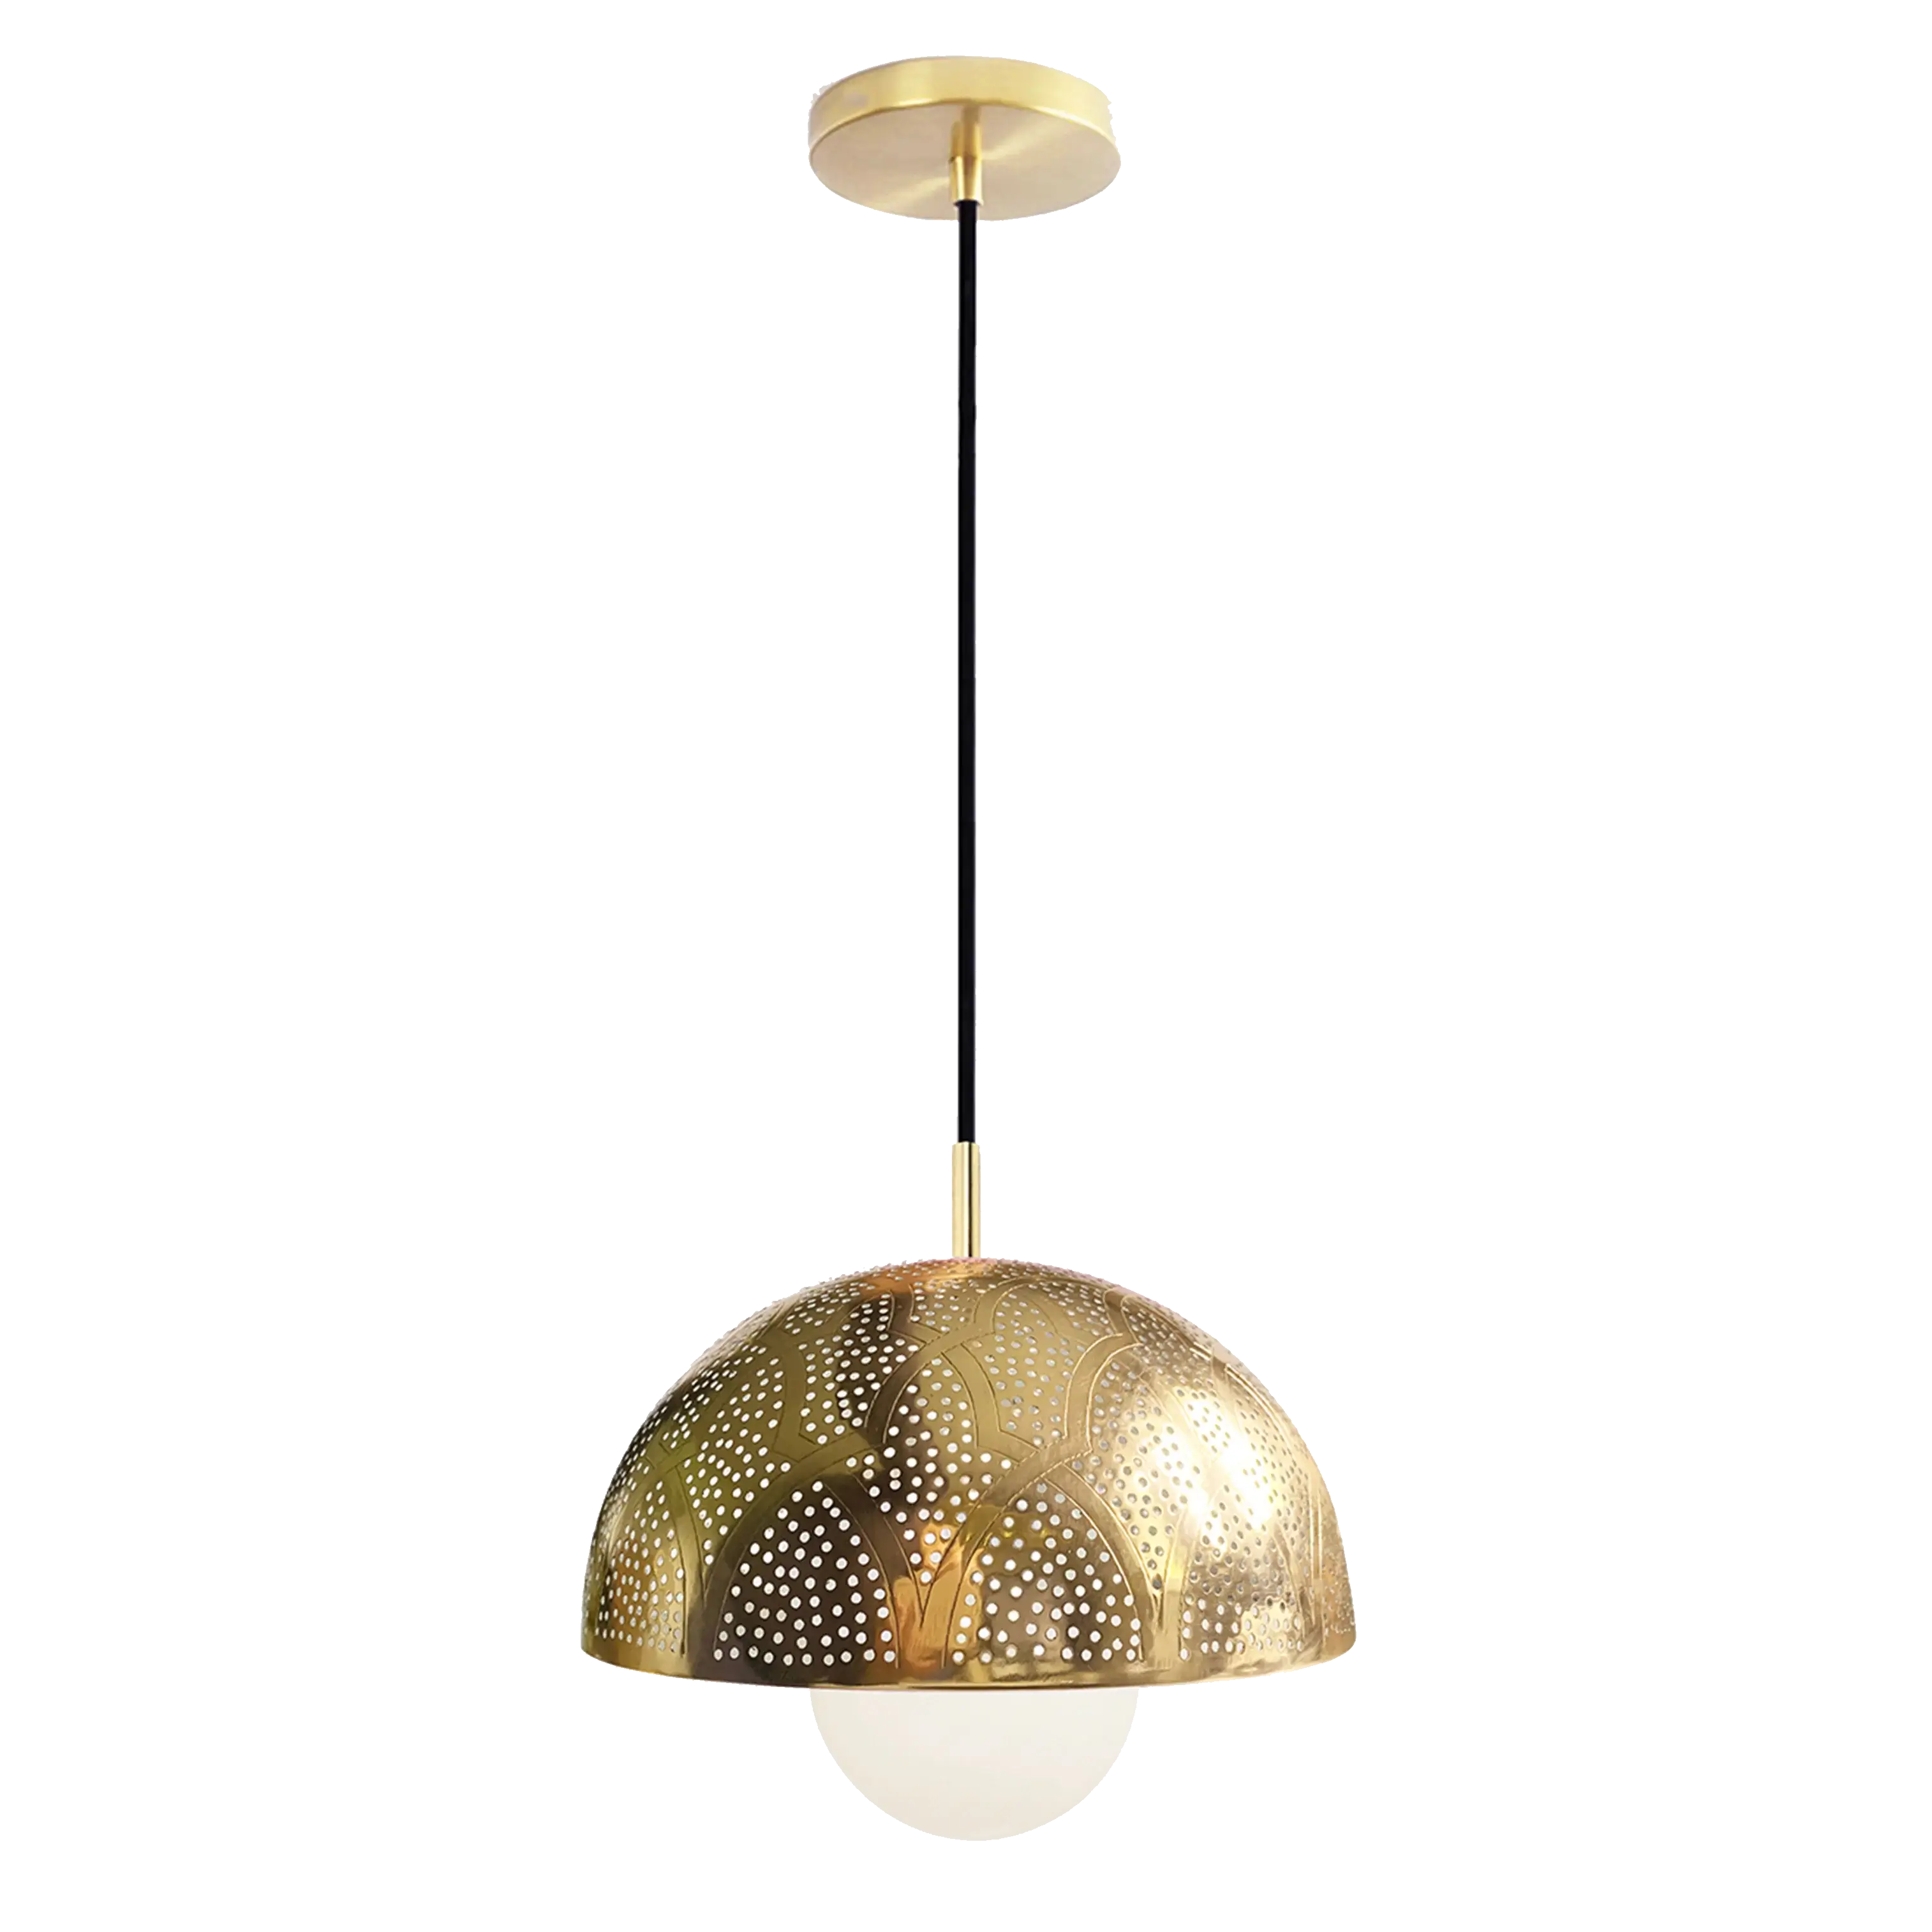 Dounia home Pendant light in Polished brass  made of Metal, Model: Zana Dome